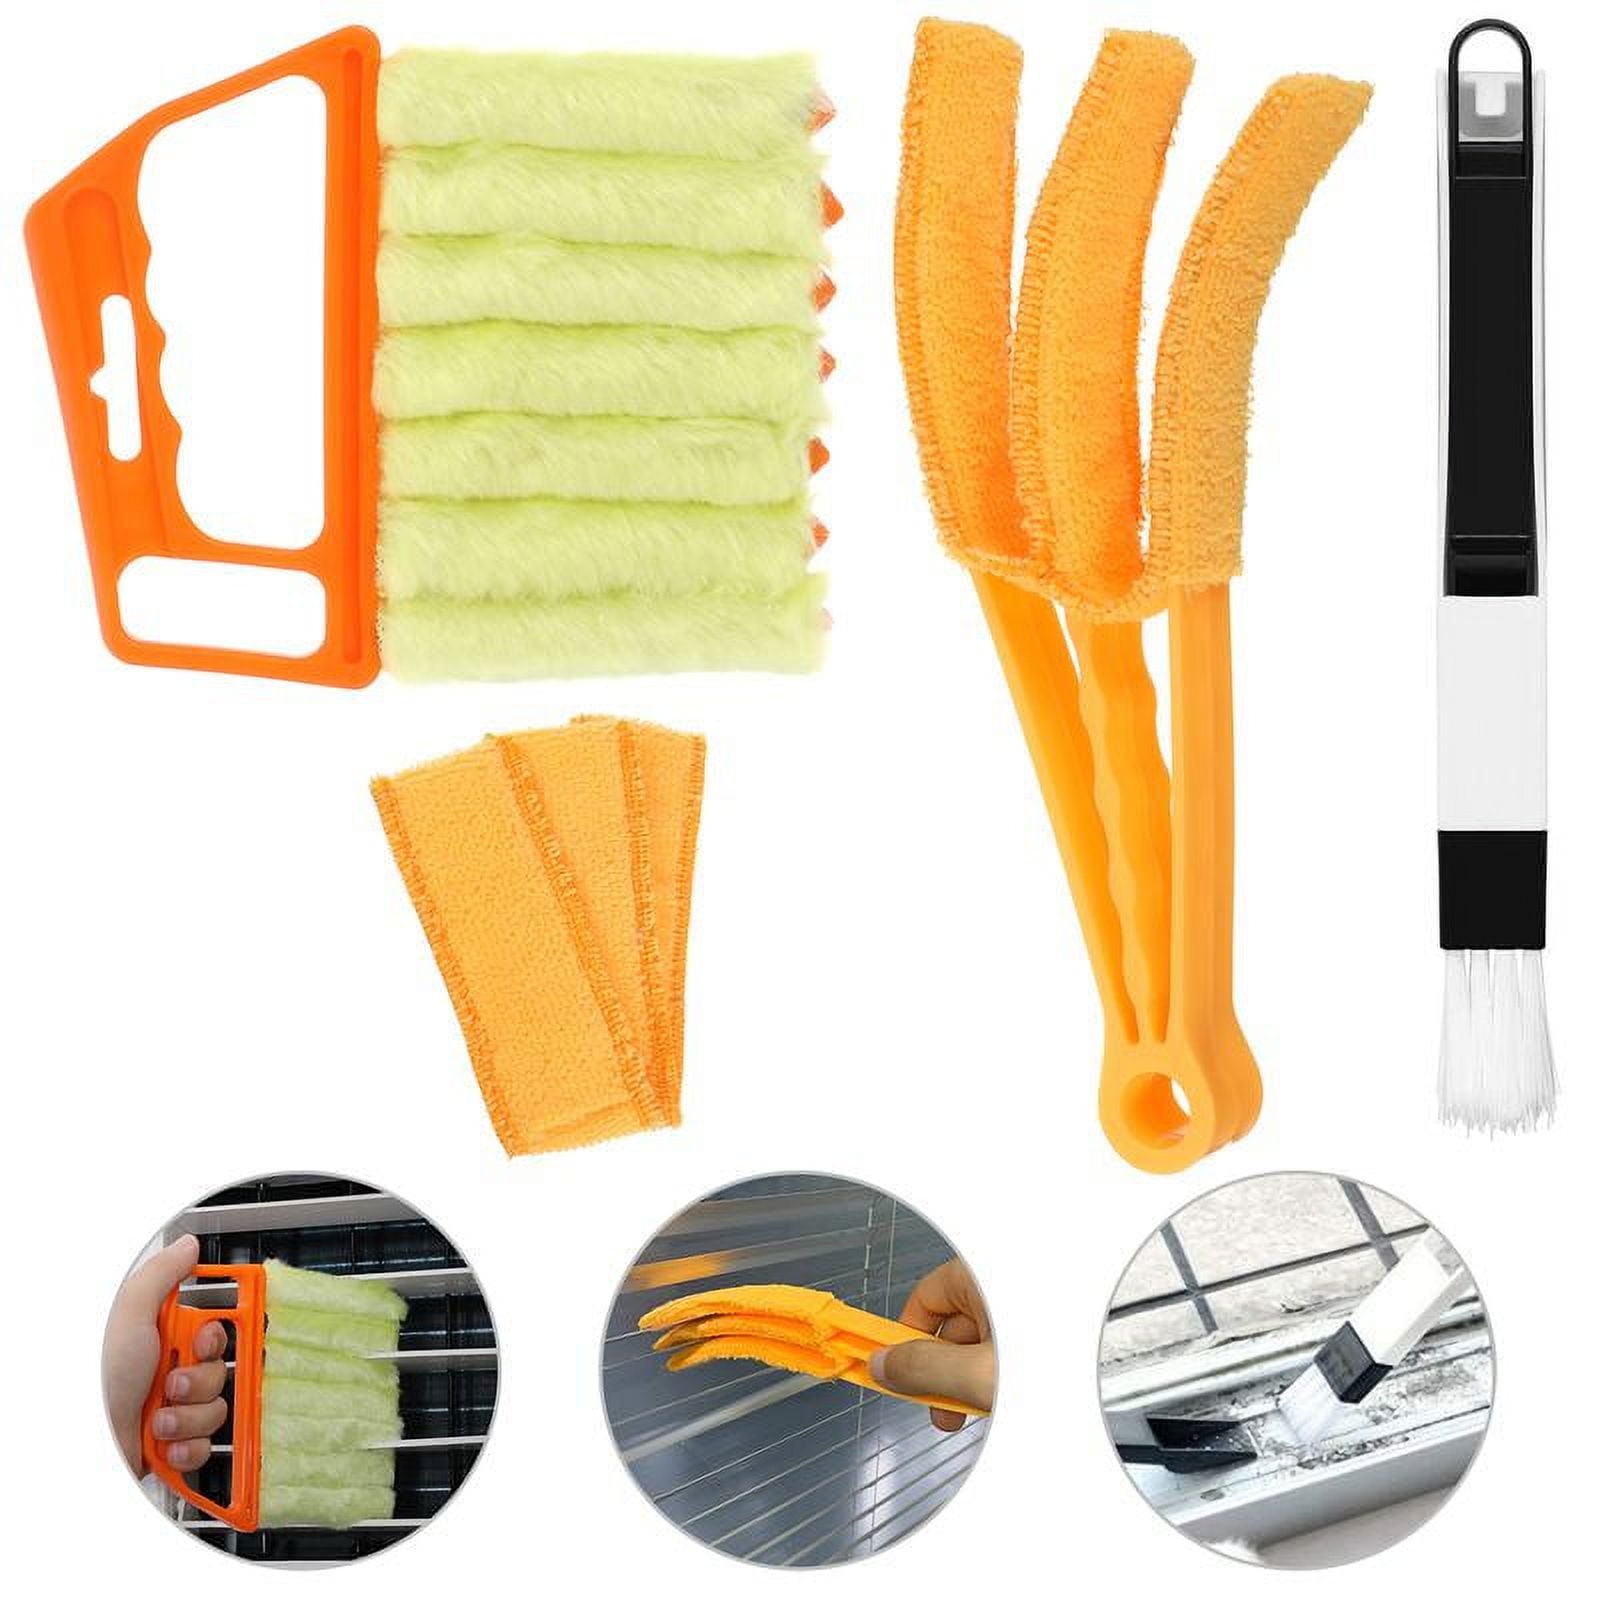 Jelly Comb Window Blind Cleaner Duster Brush with 5 Microfiber Sleeves -  Blind Cleaner Tools for Air Conditioner Window Blinds Jalousie Shutter Dust